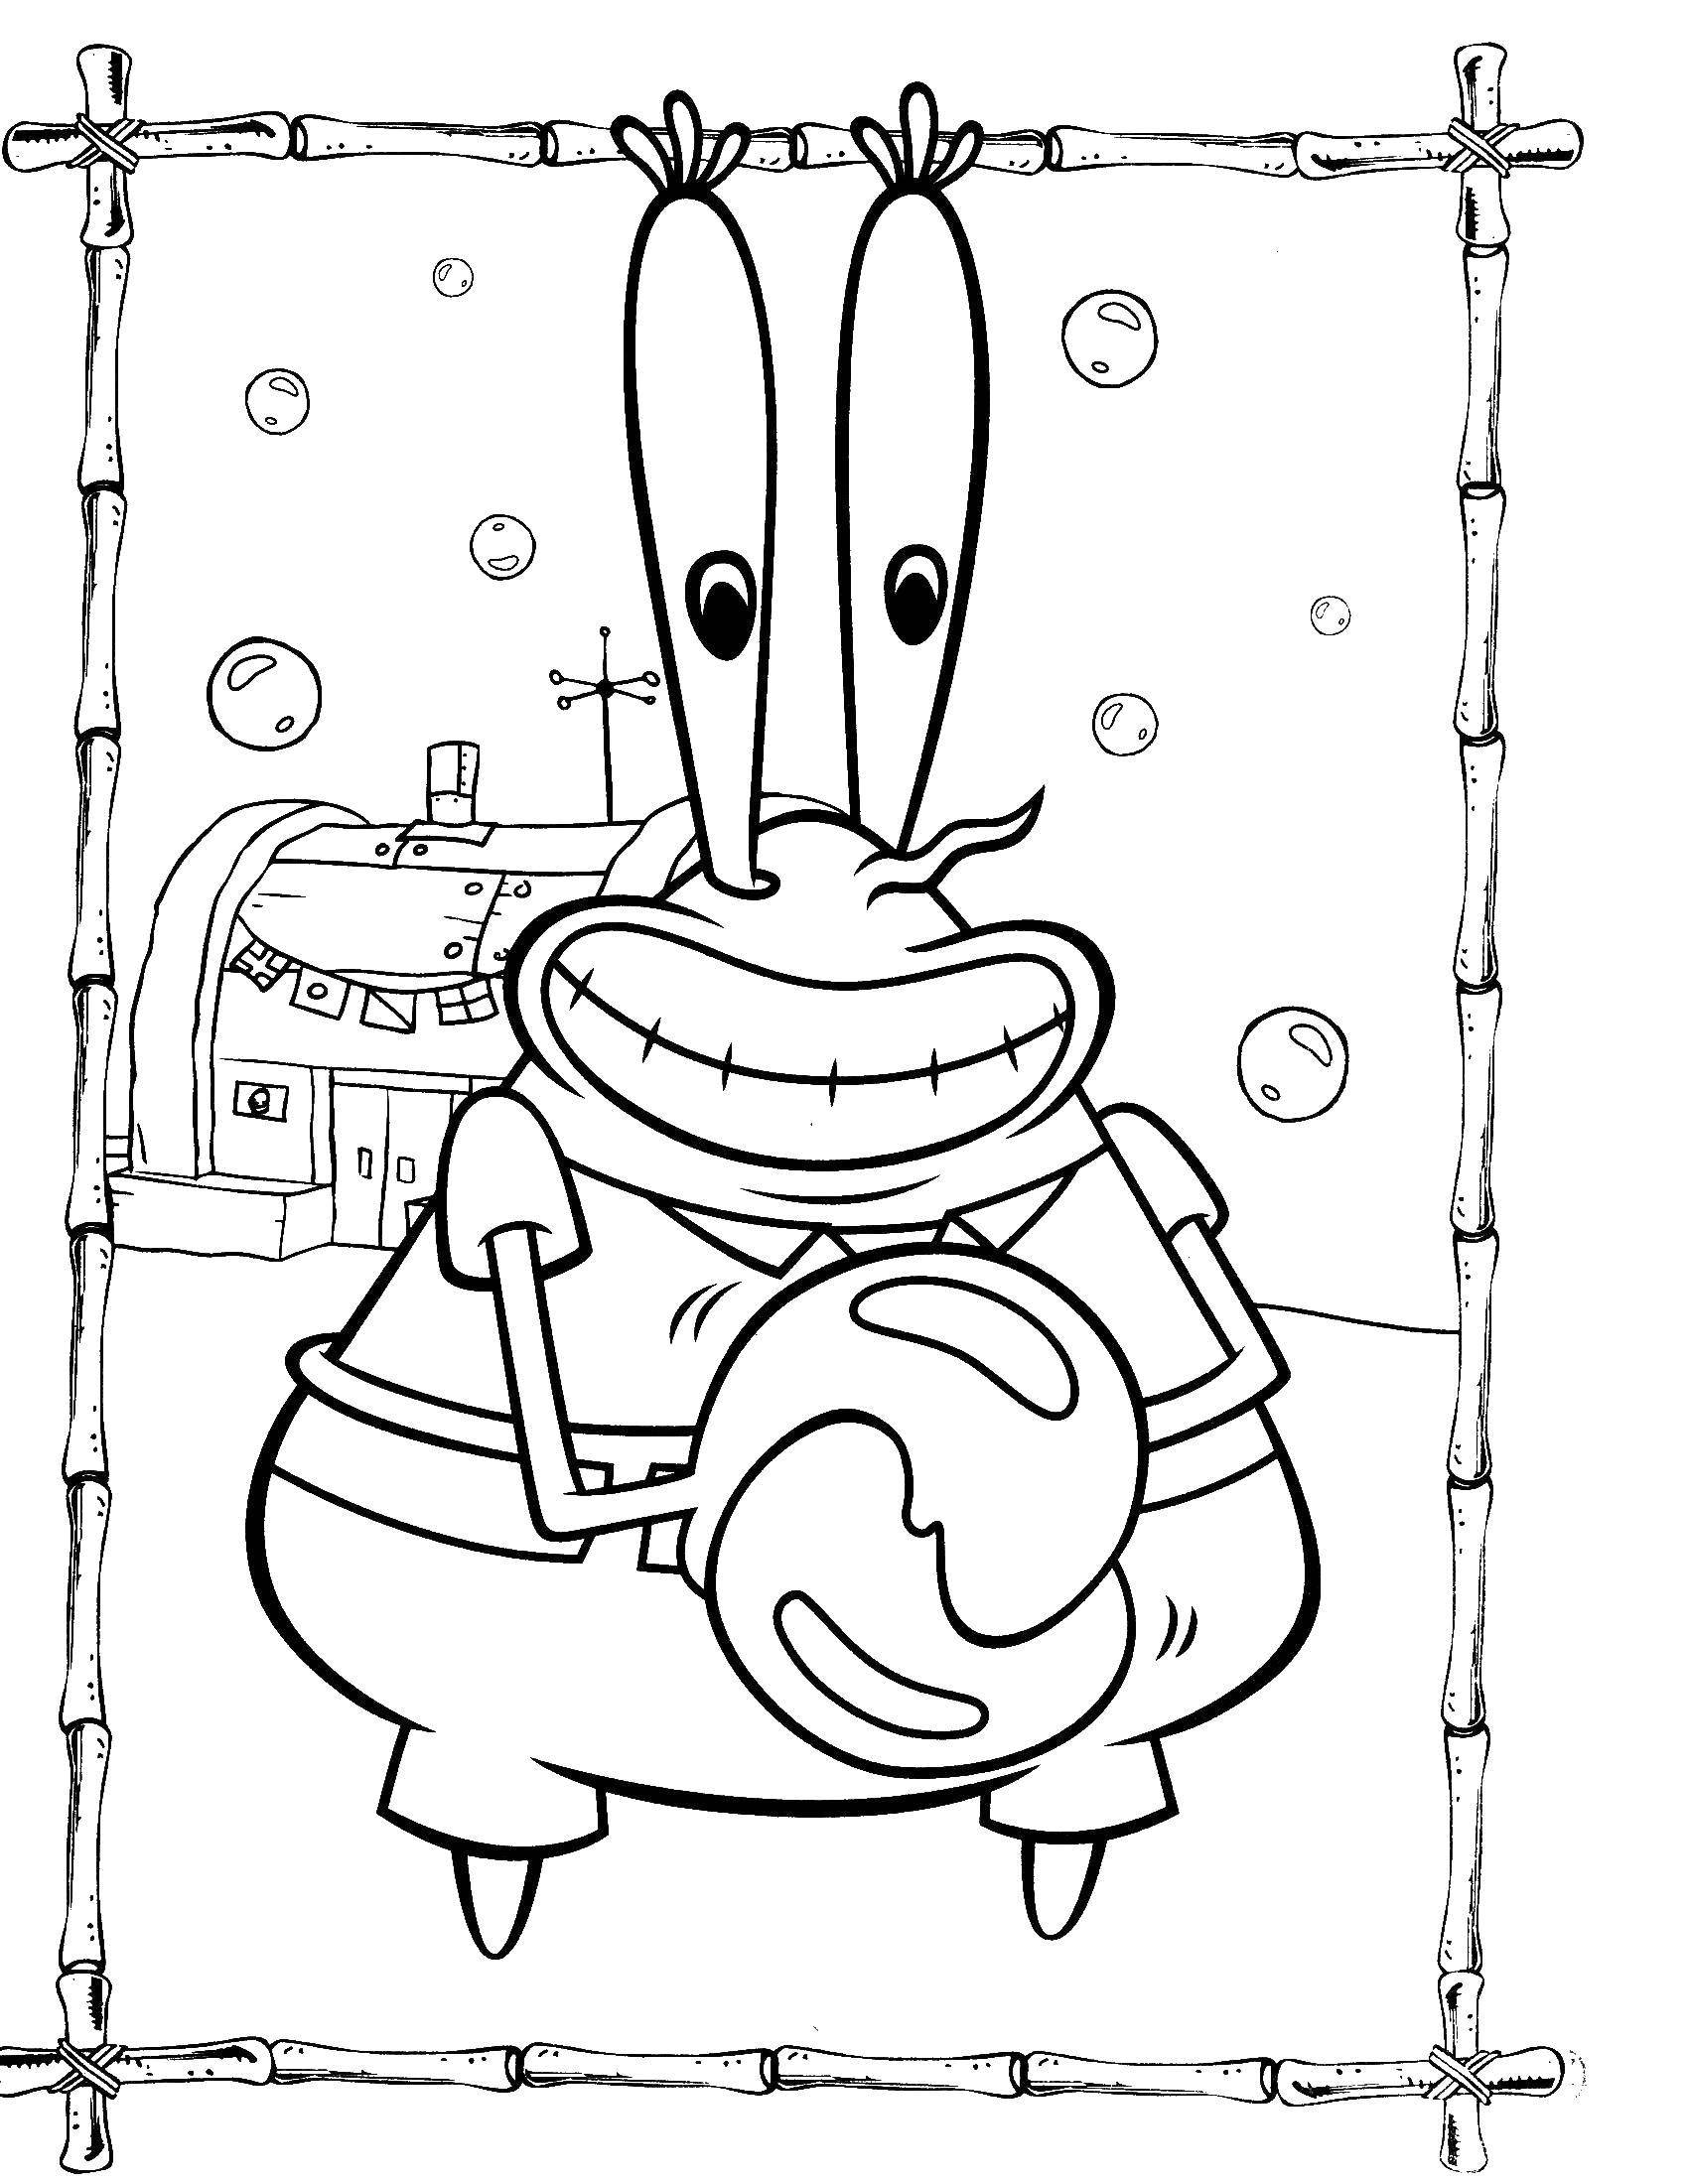 Coloring Mr. Krabs. Category Cartoon character. Tags:  Cartoon character, spongebob, spongebob, Mr. Krabs.